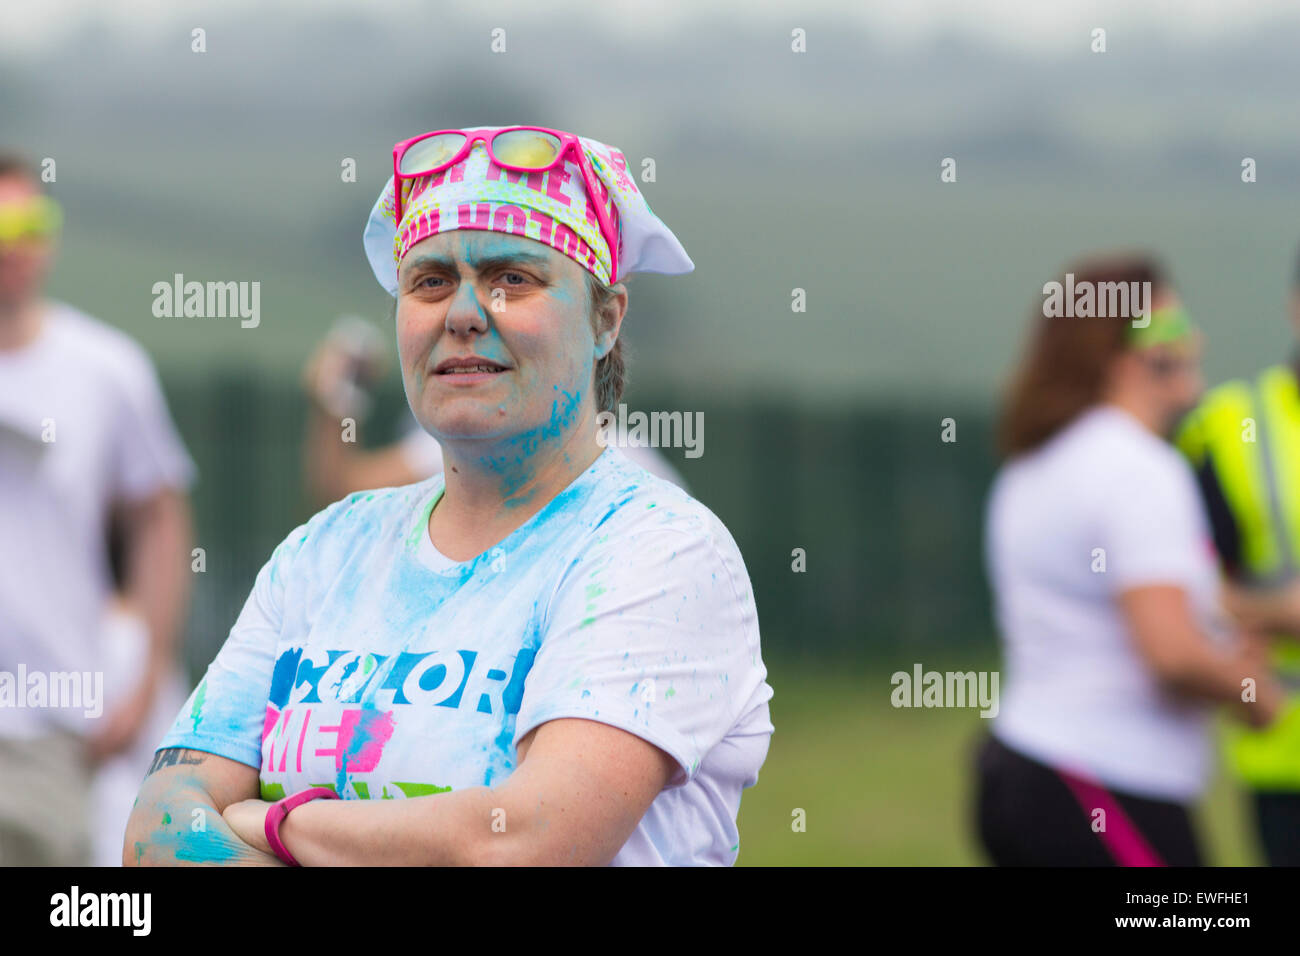 Redbourn, Hertfordshire, UK. 13th June, 2015. People gathered at the Hertfordshire County Show for the Color Me Rad 5K run. Stock Photo